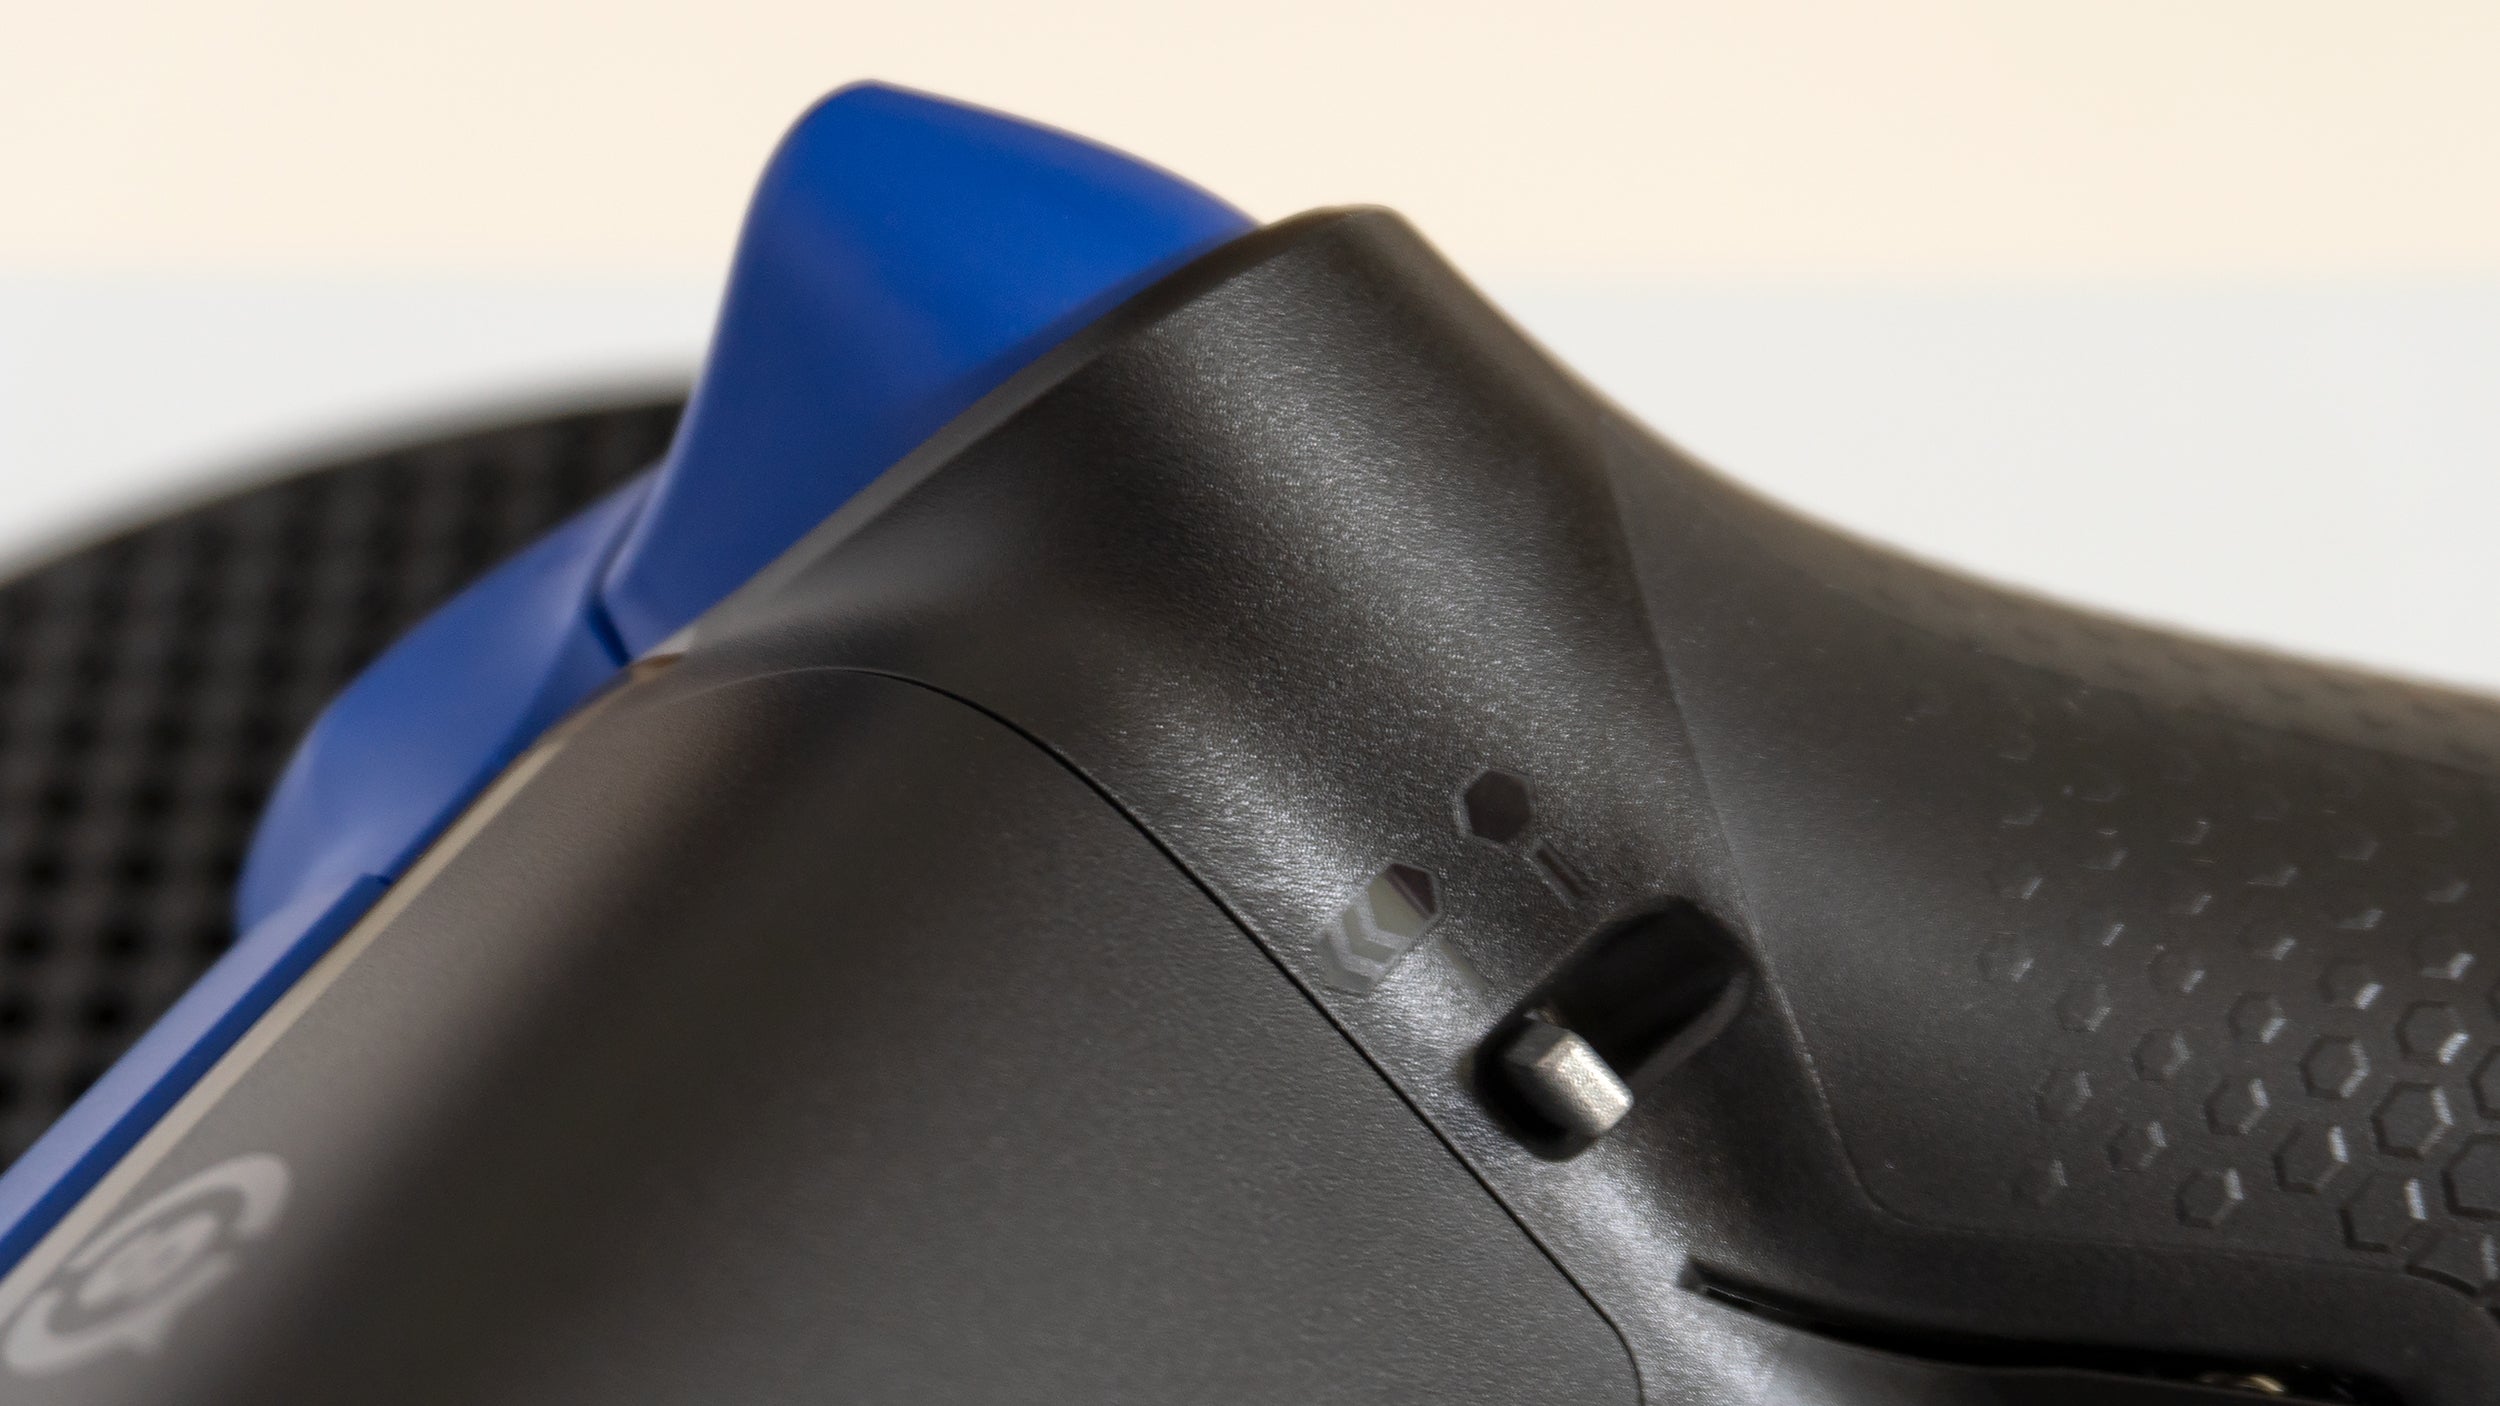 On the Instinct Pro the buttons that limit the travel of the shoulder triggers have been redesigned so they completely limit the trigger's travel, making it feel more like an action button instead. (Photo: Andrew Liszewski - Gizmodo)